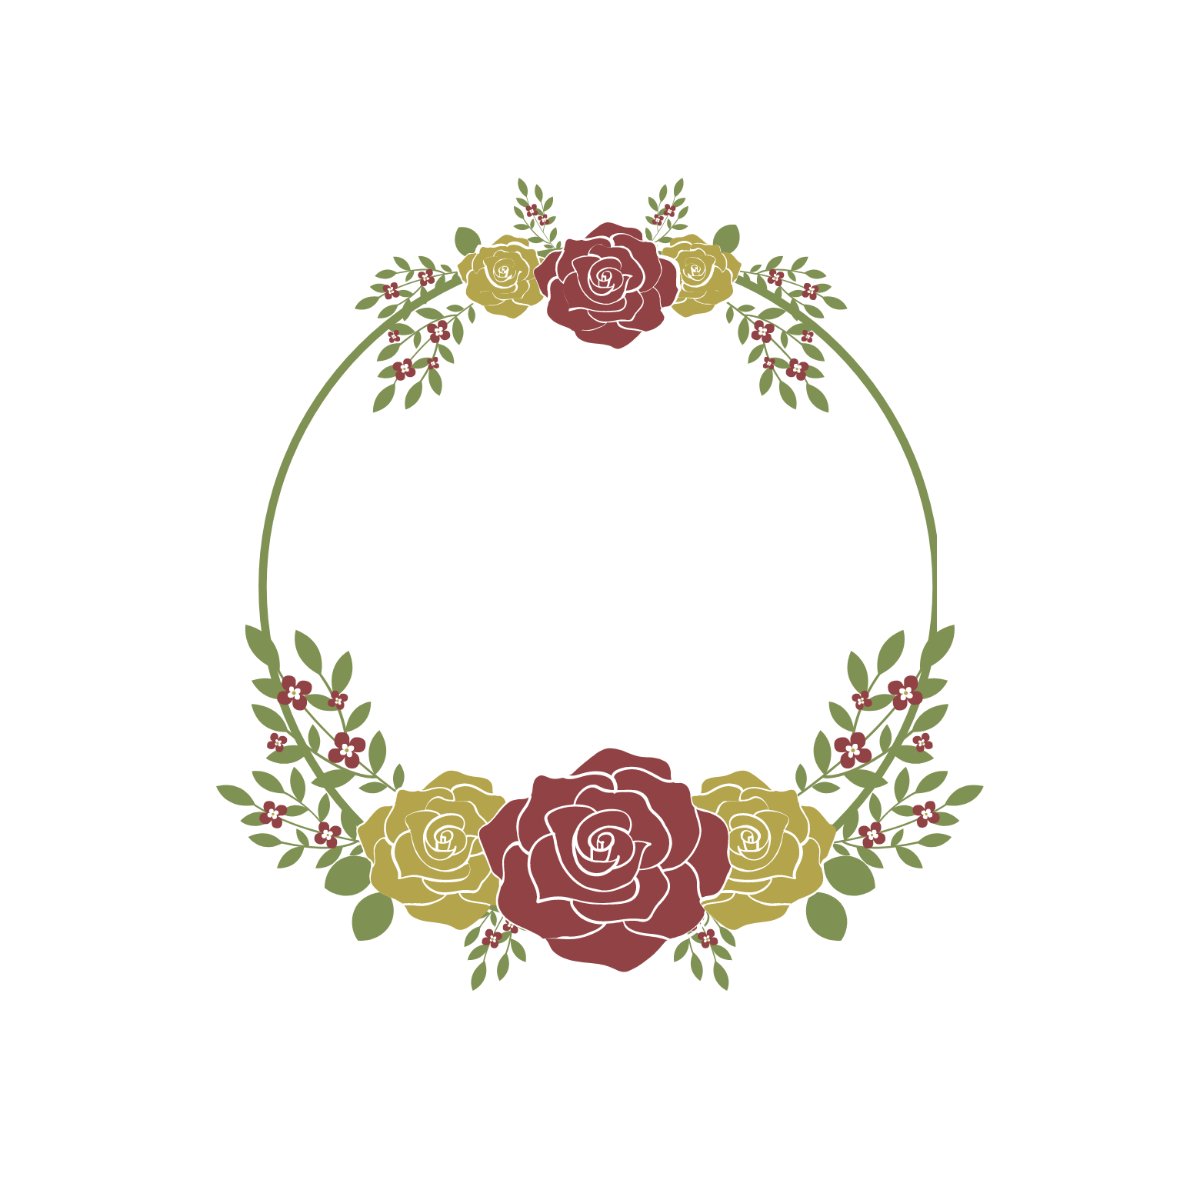 Rustic Floral Wreath Vector Template